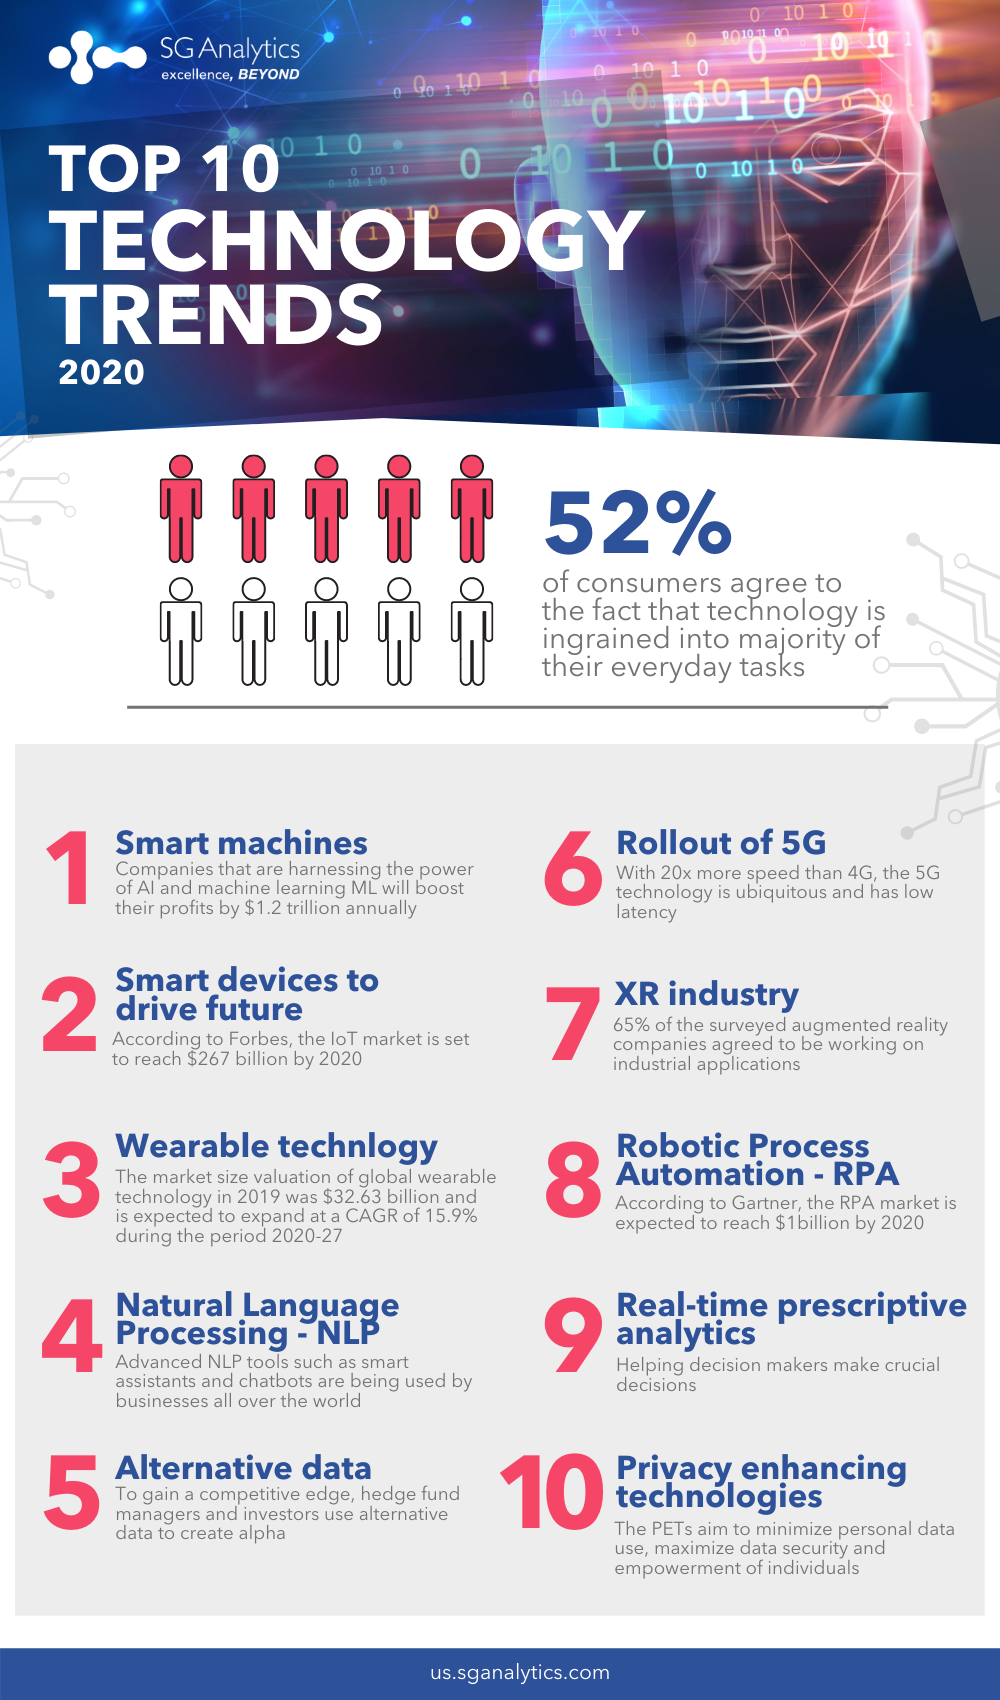 Top 10 technology trends 2020